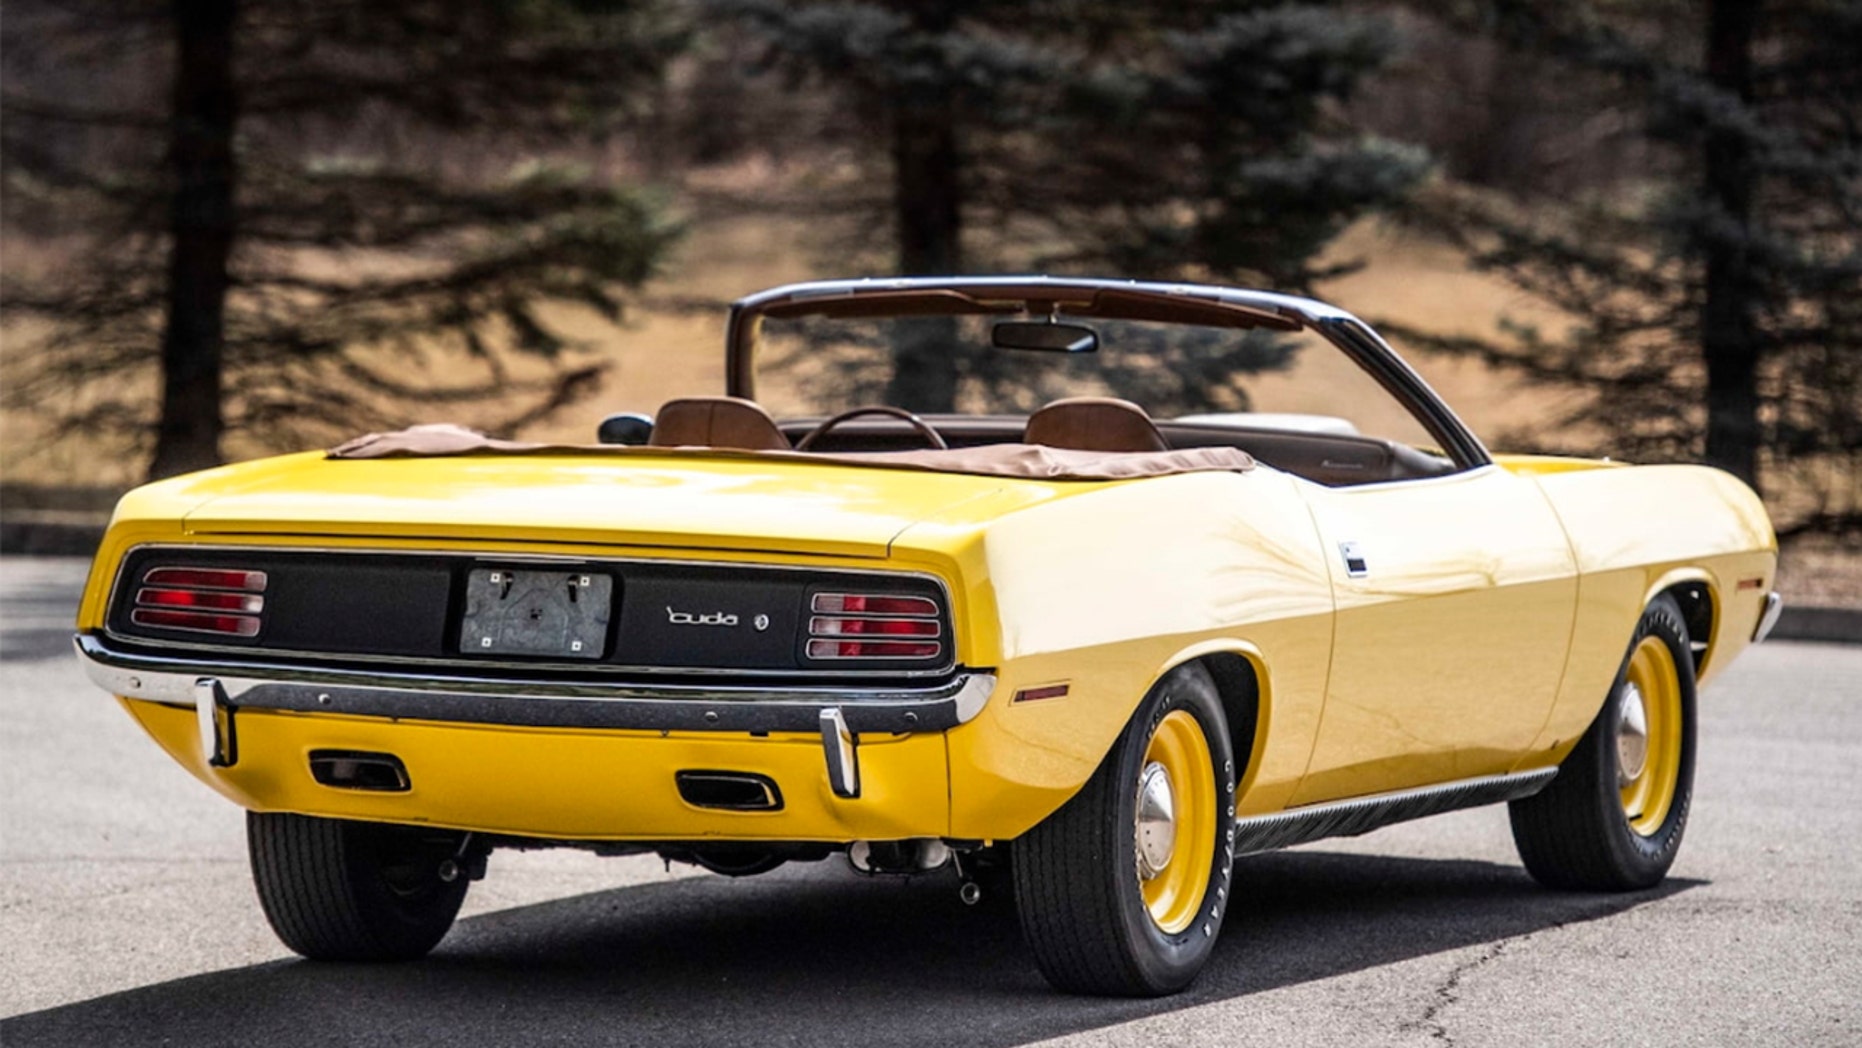 A Rare 1970 Plymouth Hemi Cuda Sells For Nearly $2M : The Motor Masters